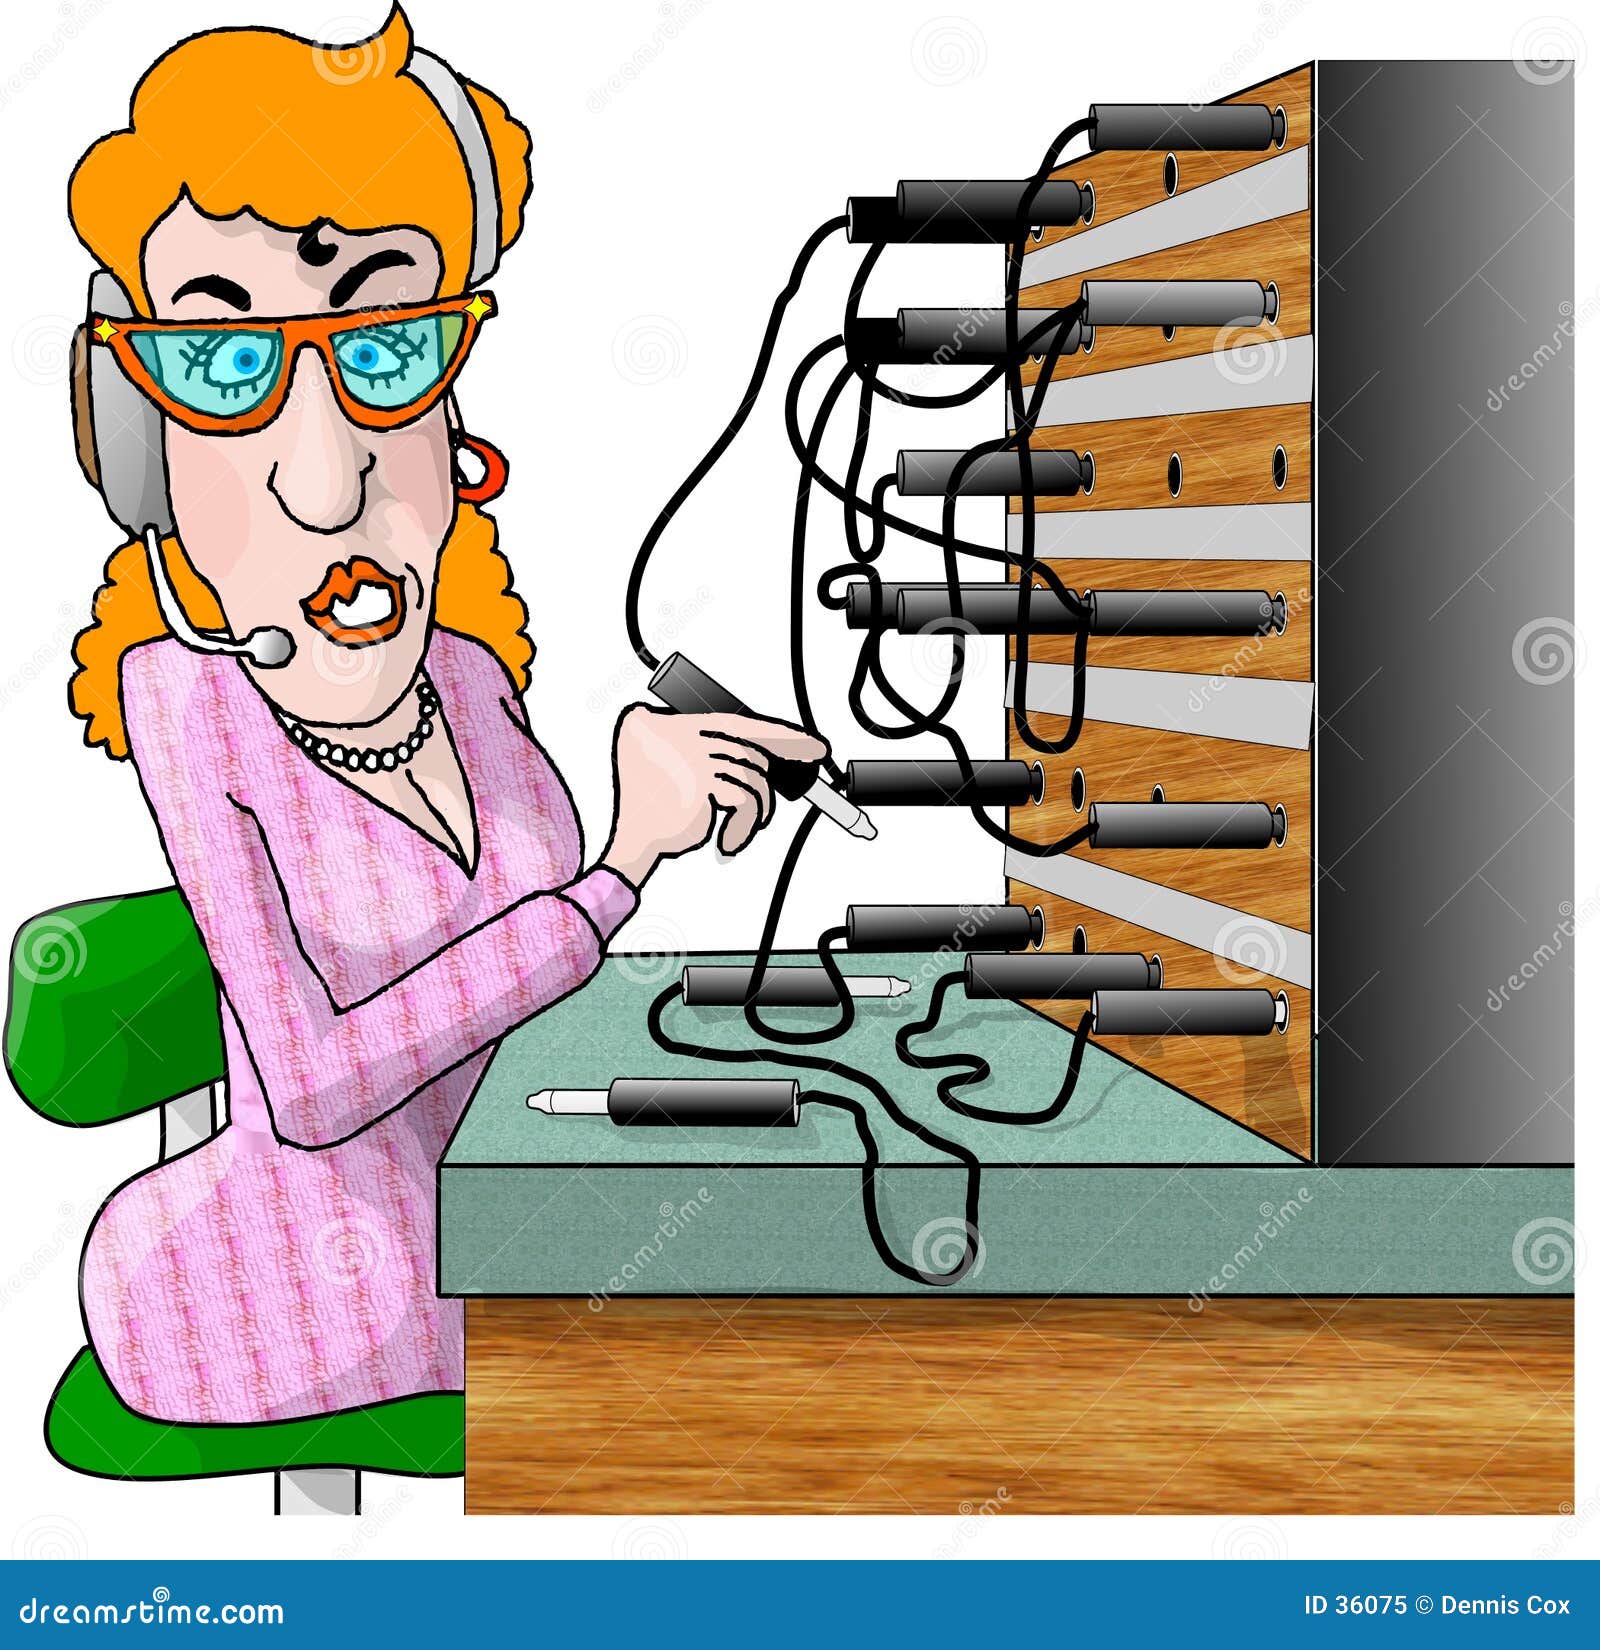 Switchboard Cartoons, Illustrations & Vector Stock Images - 1527